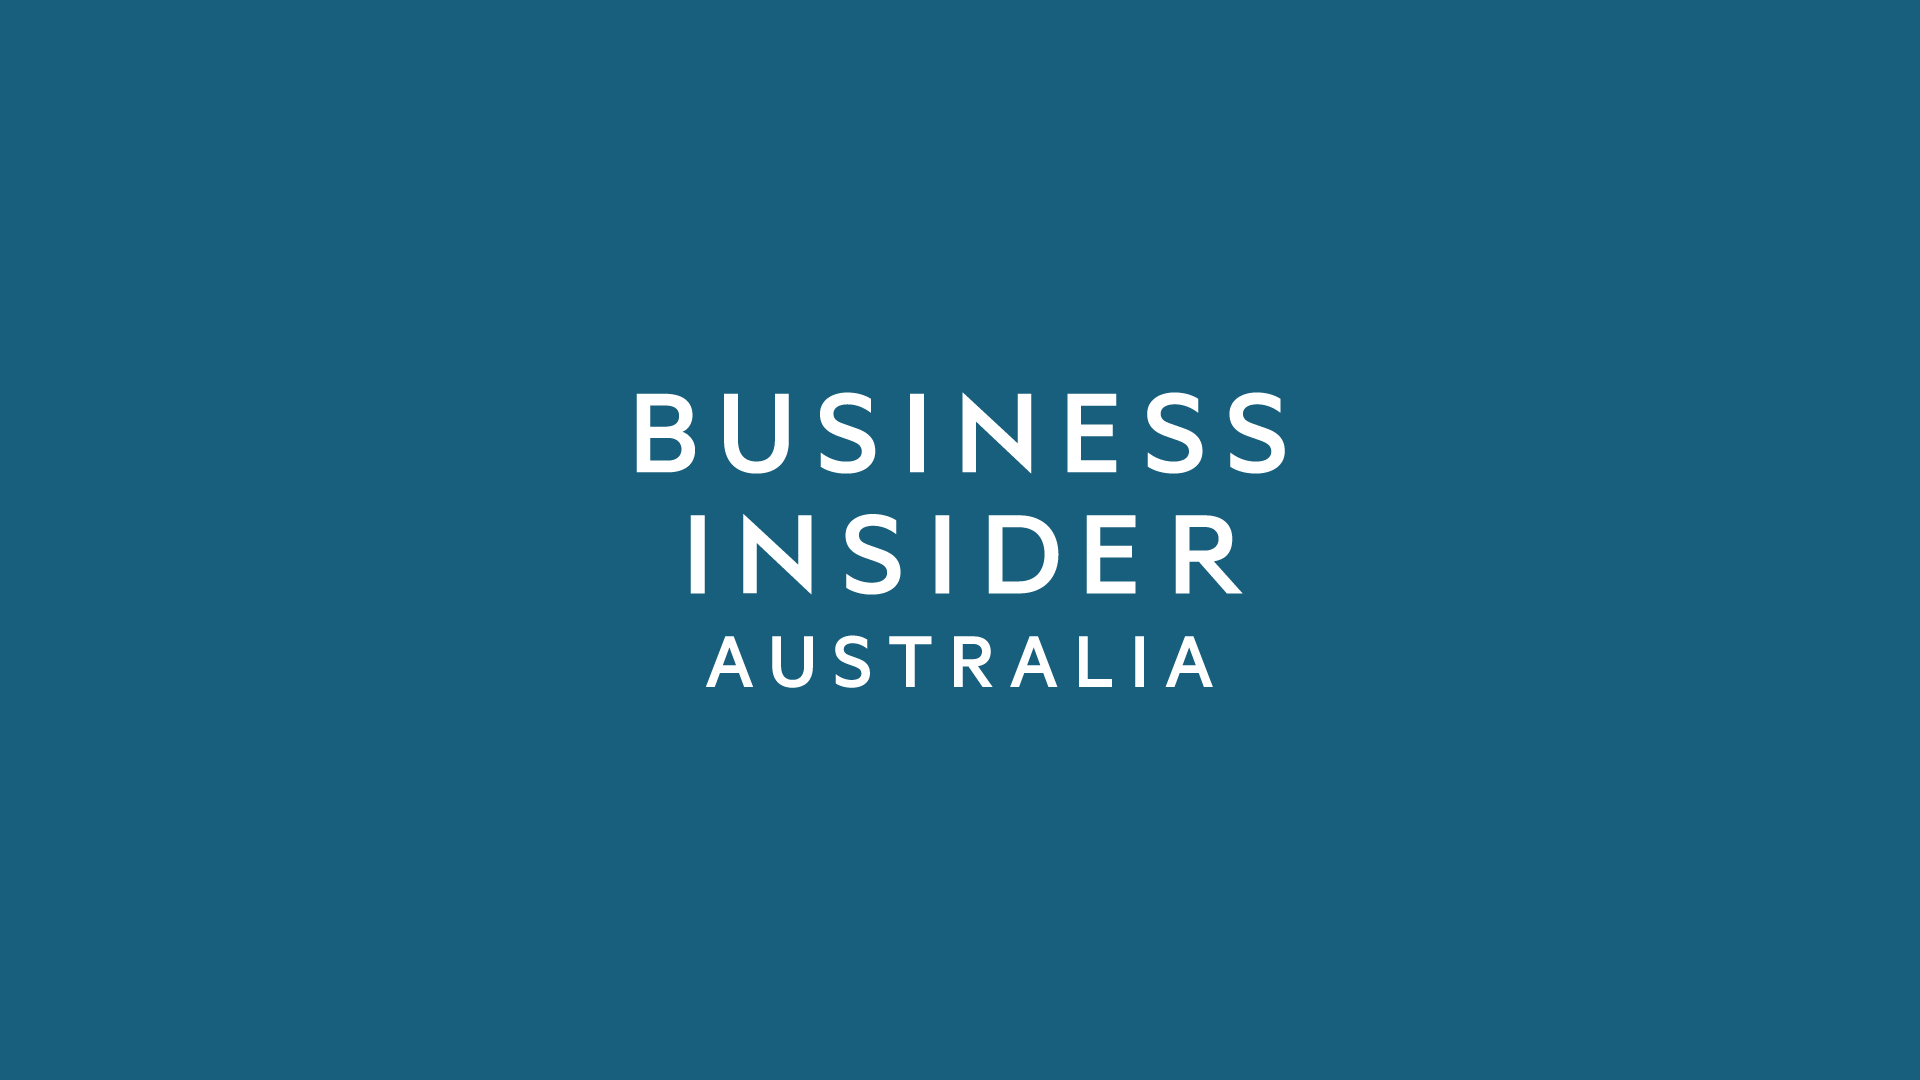 Business Insider Australia to close in reported ‘global strategic decision’